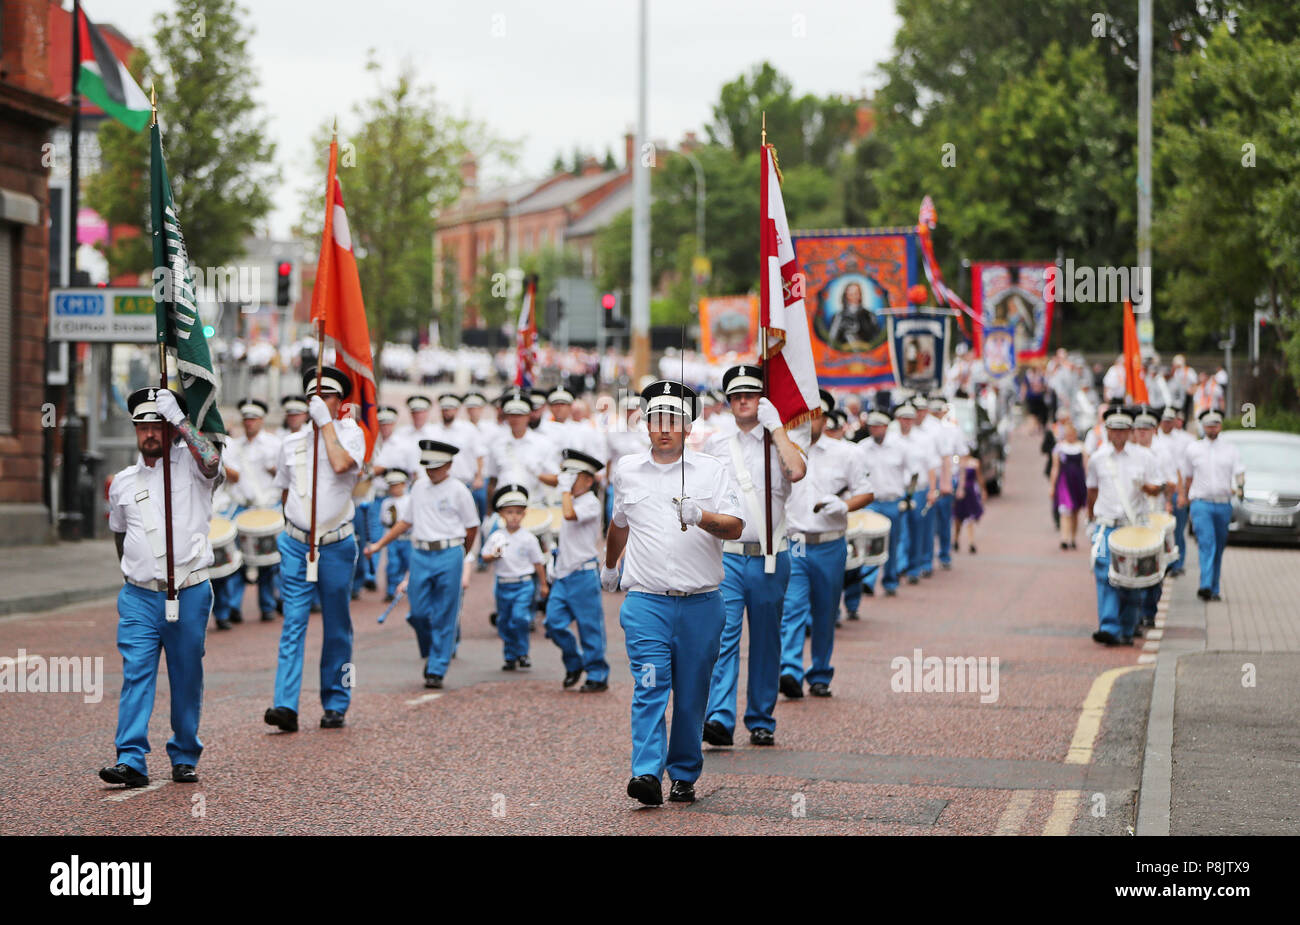 Bandsmen and Orange order members take part in the annual Twelfth of July celebrations in Belfast city centre, marking the victory of King William III's victory over James II at the Battle of the Boyne in 1690. Stock Photo